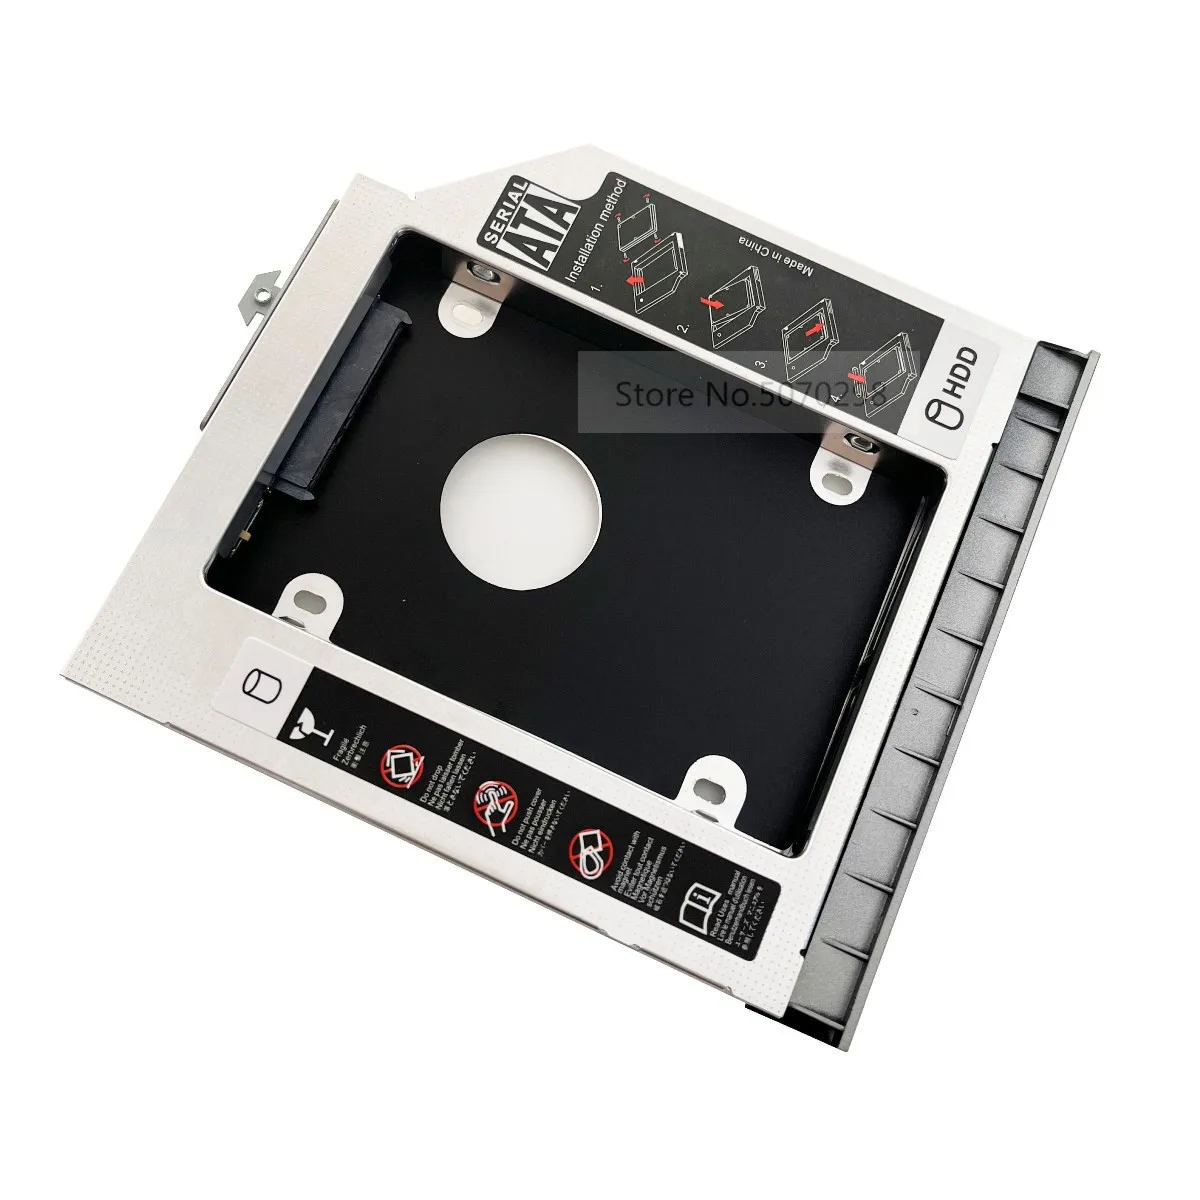 

with Bezel Front Cover 2nd SATA 3.0 2.5" Hard Drive HDD SSD Optical Caddy Frame Tray for HP EliteBook 8460P 8460W 8470P 8470W